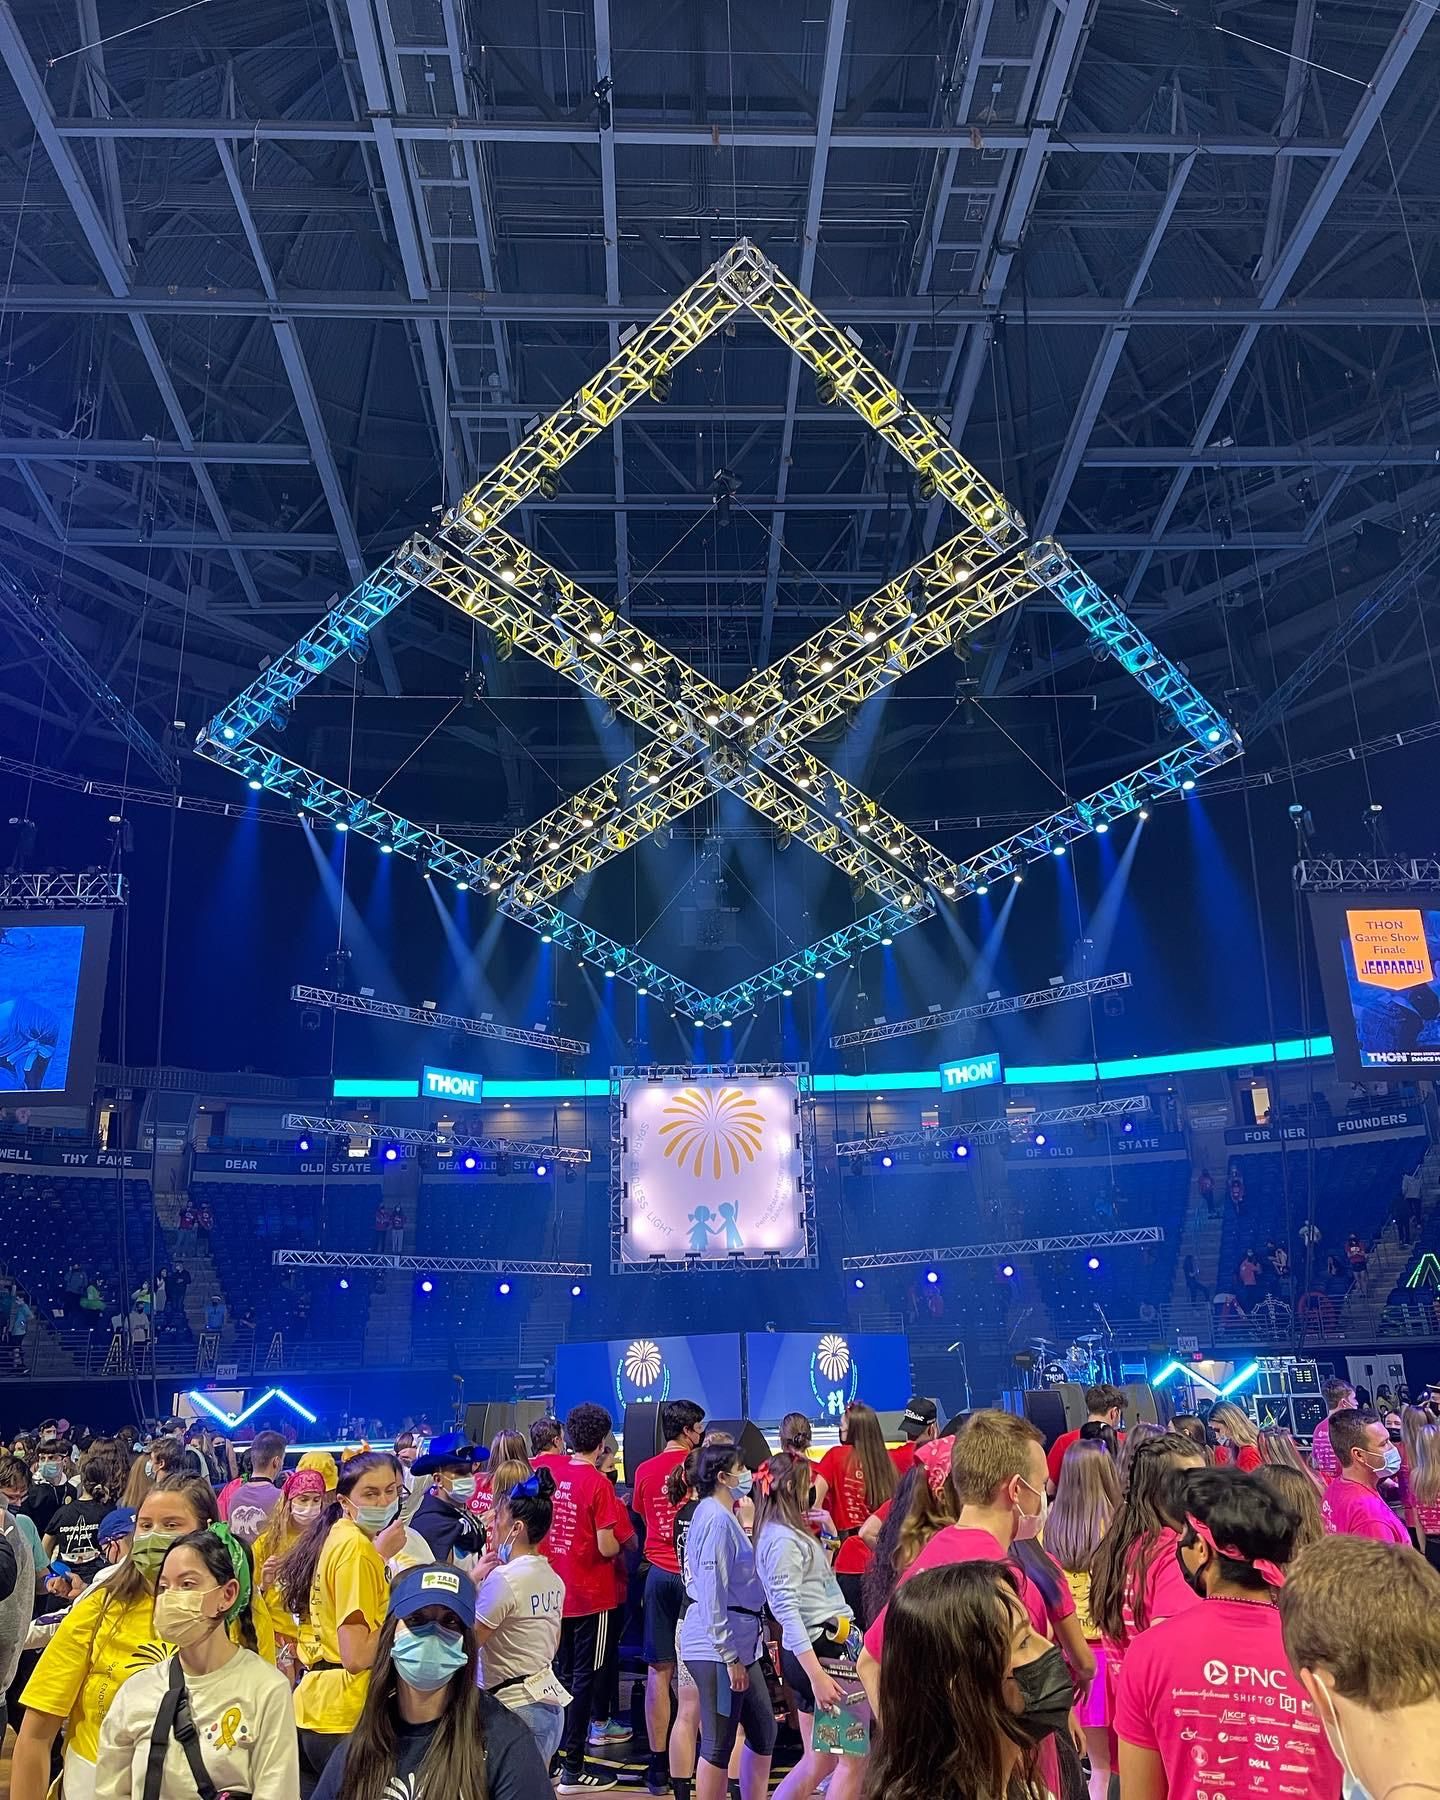 WELCOME HOME THON, 50 YEARS OF FUNDRAISING